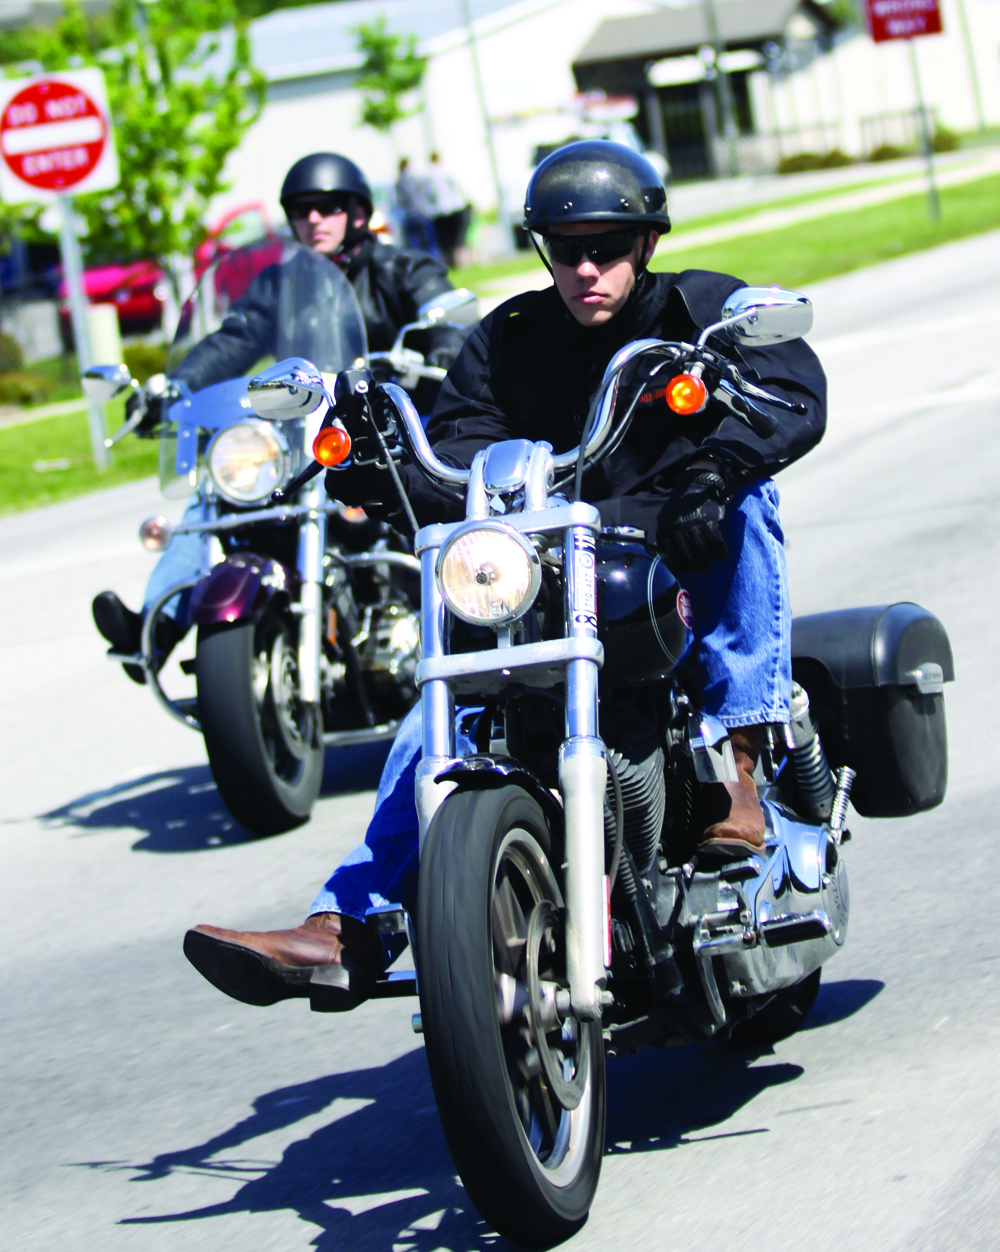 VMM-263 Motorcycle Club rolls down to Fort Fisher